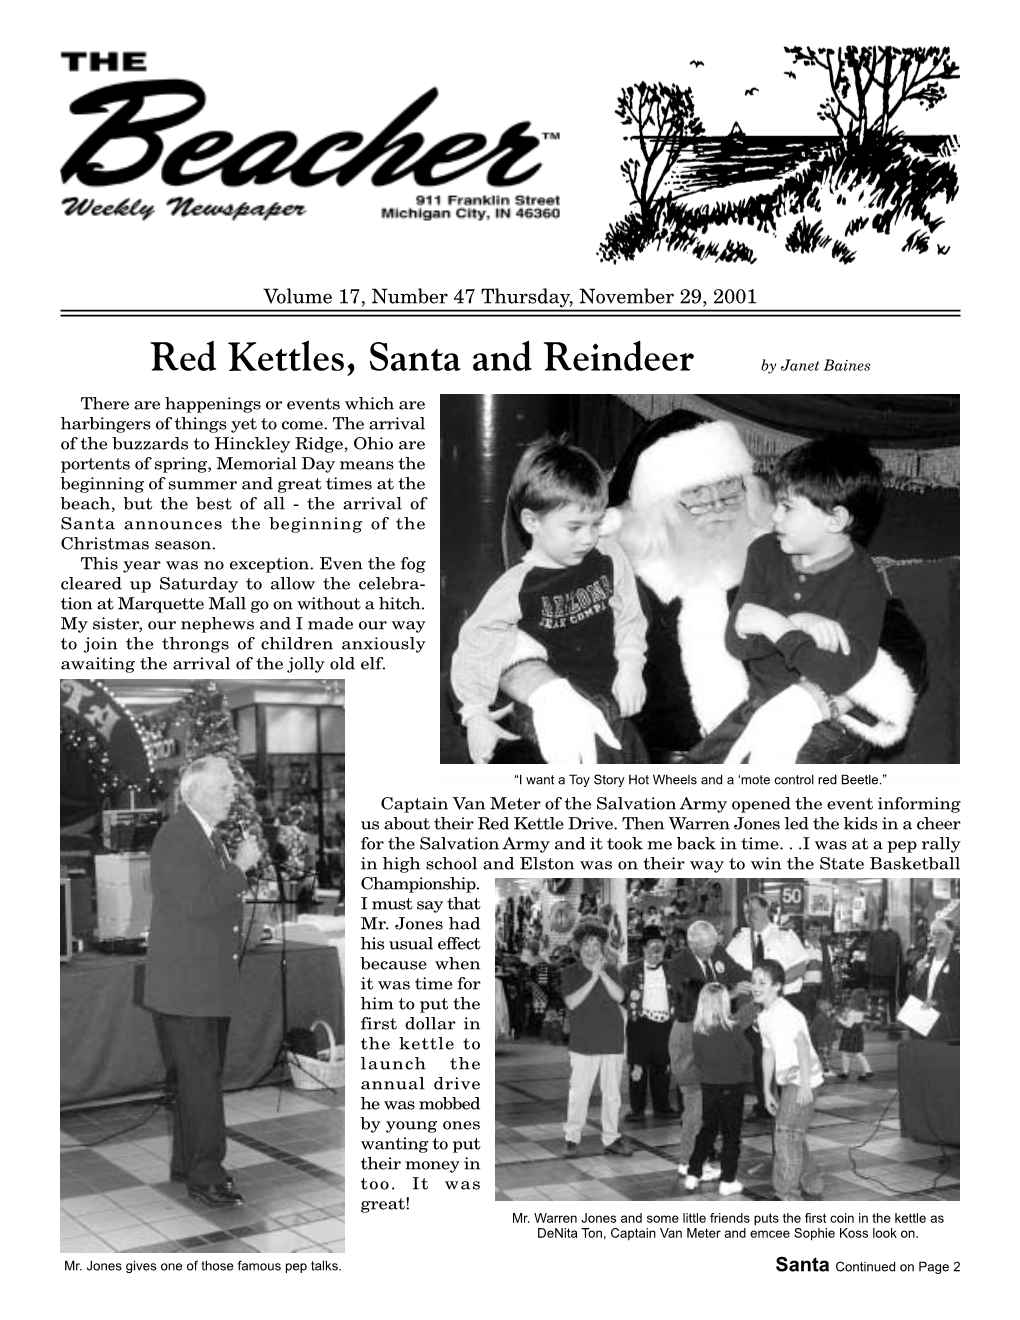 Red Kettles, Santa and Reindeer by Janet Baines